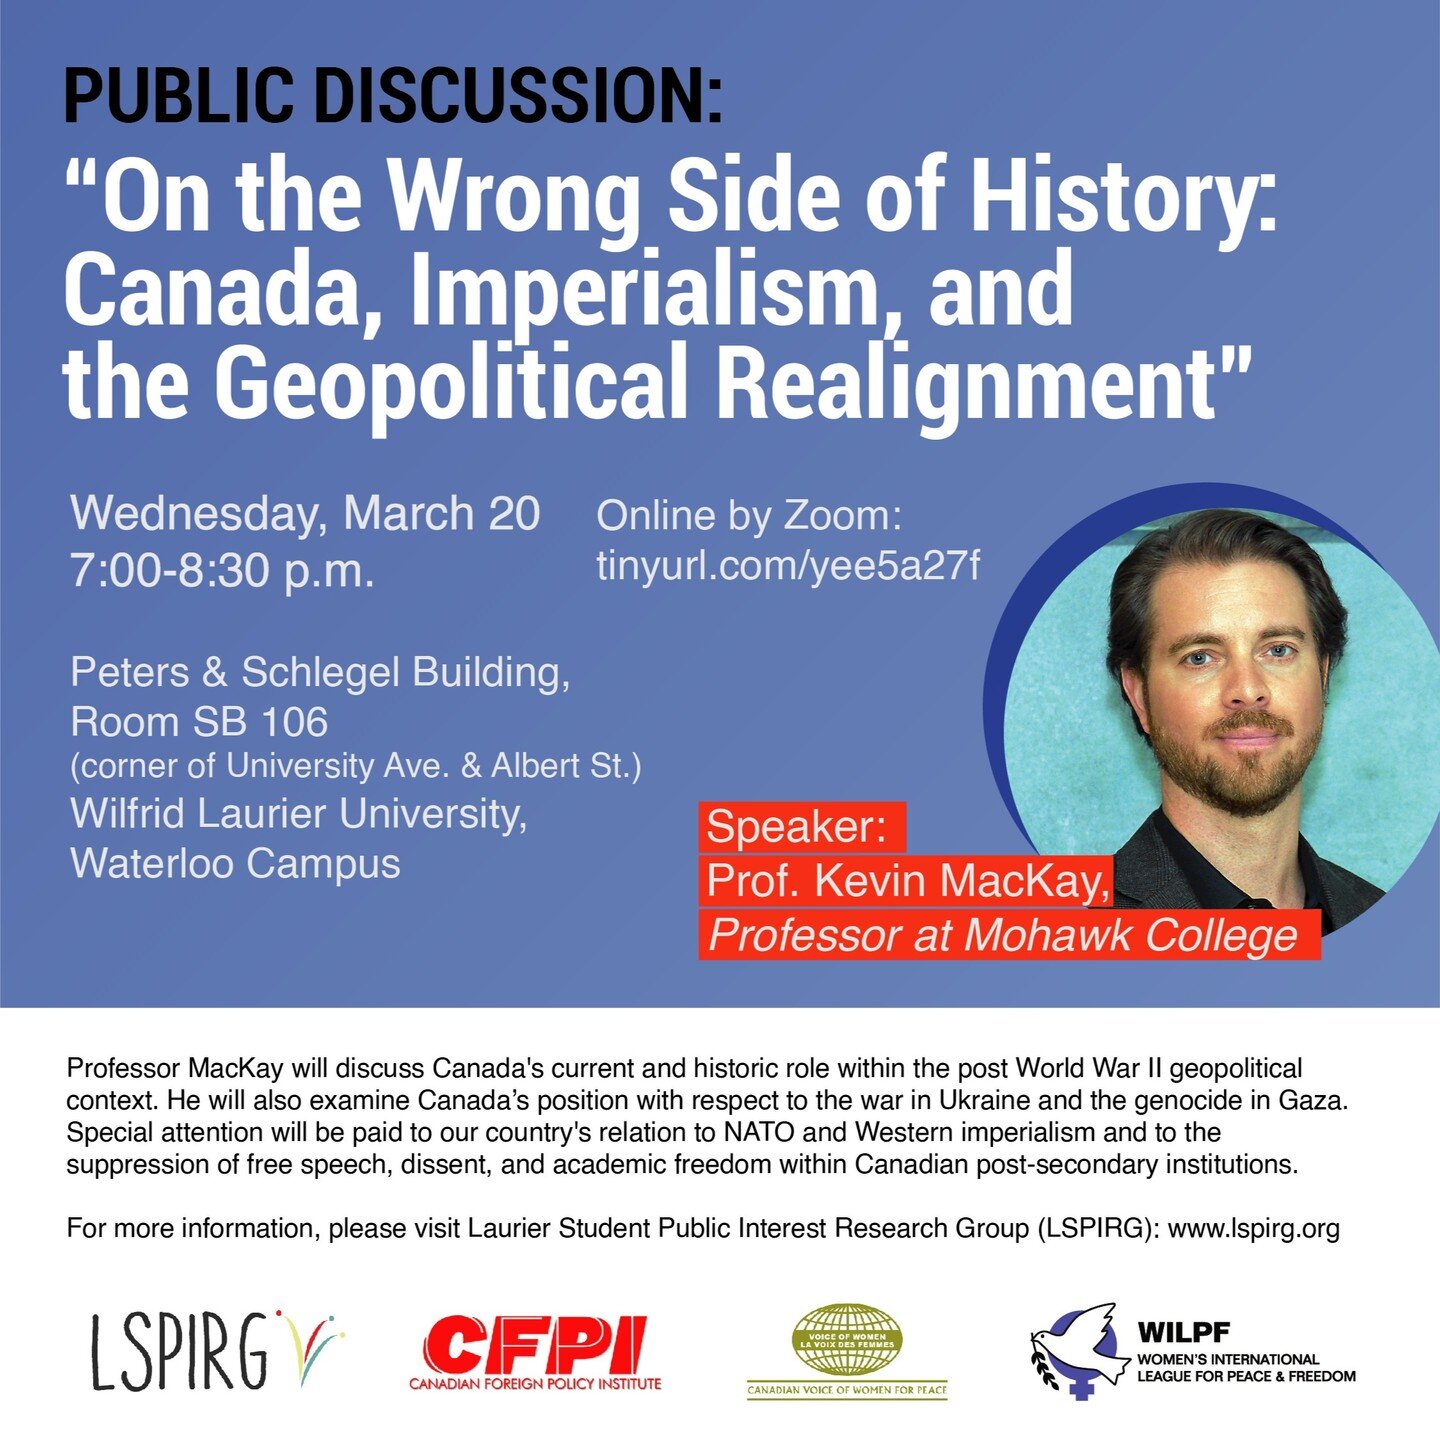 Check out two hybrid events we are sponsoring tomorrow and next week! 
&ldquo;On the Wrong Side of History: Canada, Imperialism, and the Geopolitical Realignment&rdquo;

Speaker: Prof. Kevin MacKay, Professor Mohawk College

Wednesday, March 20

7:00